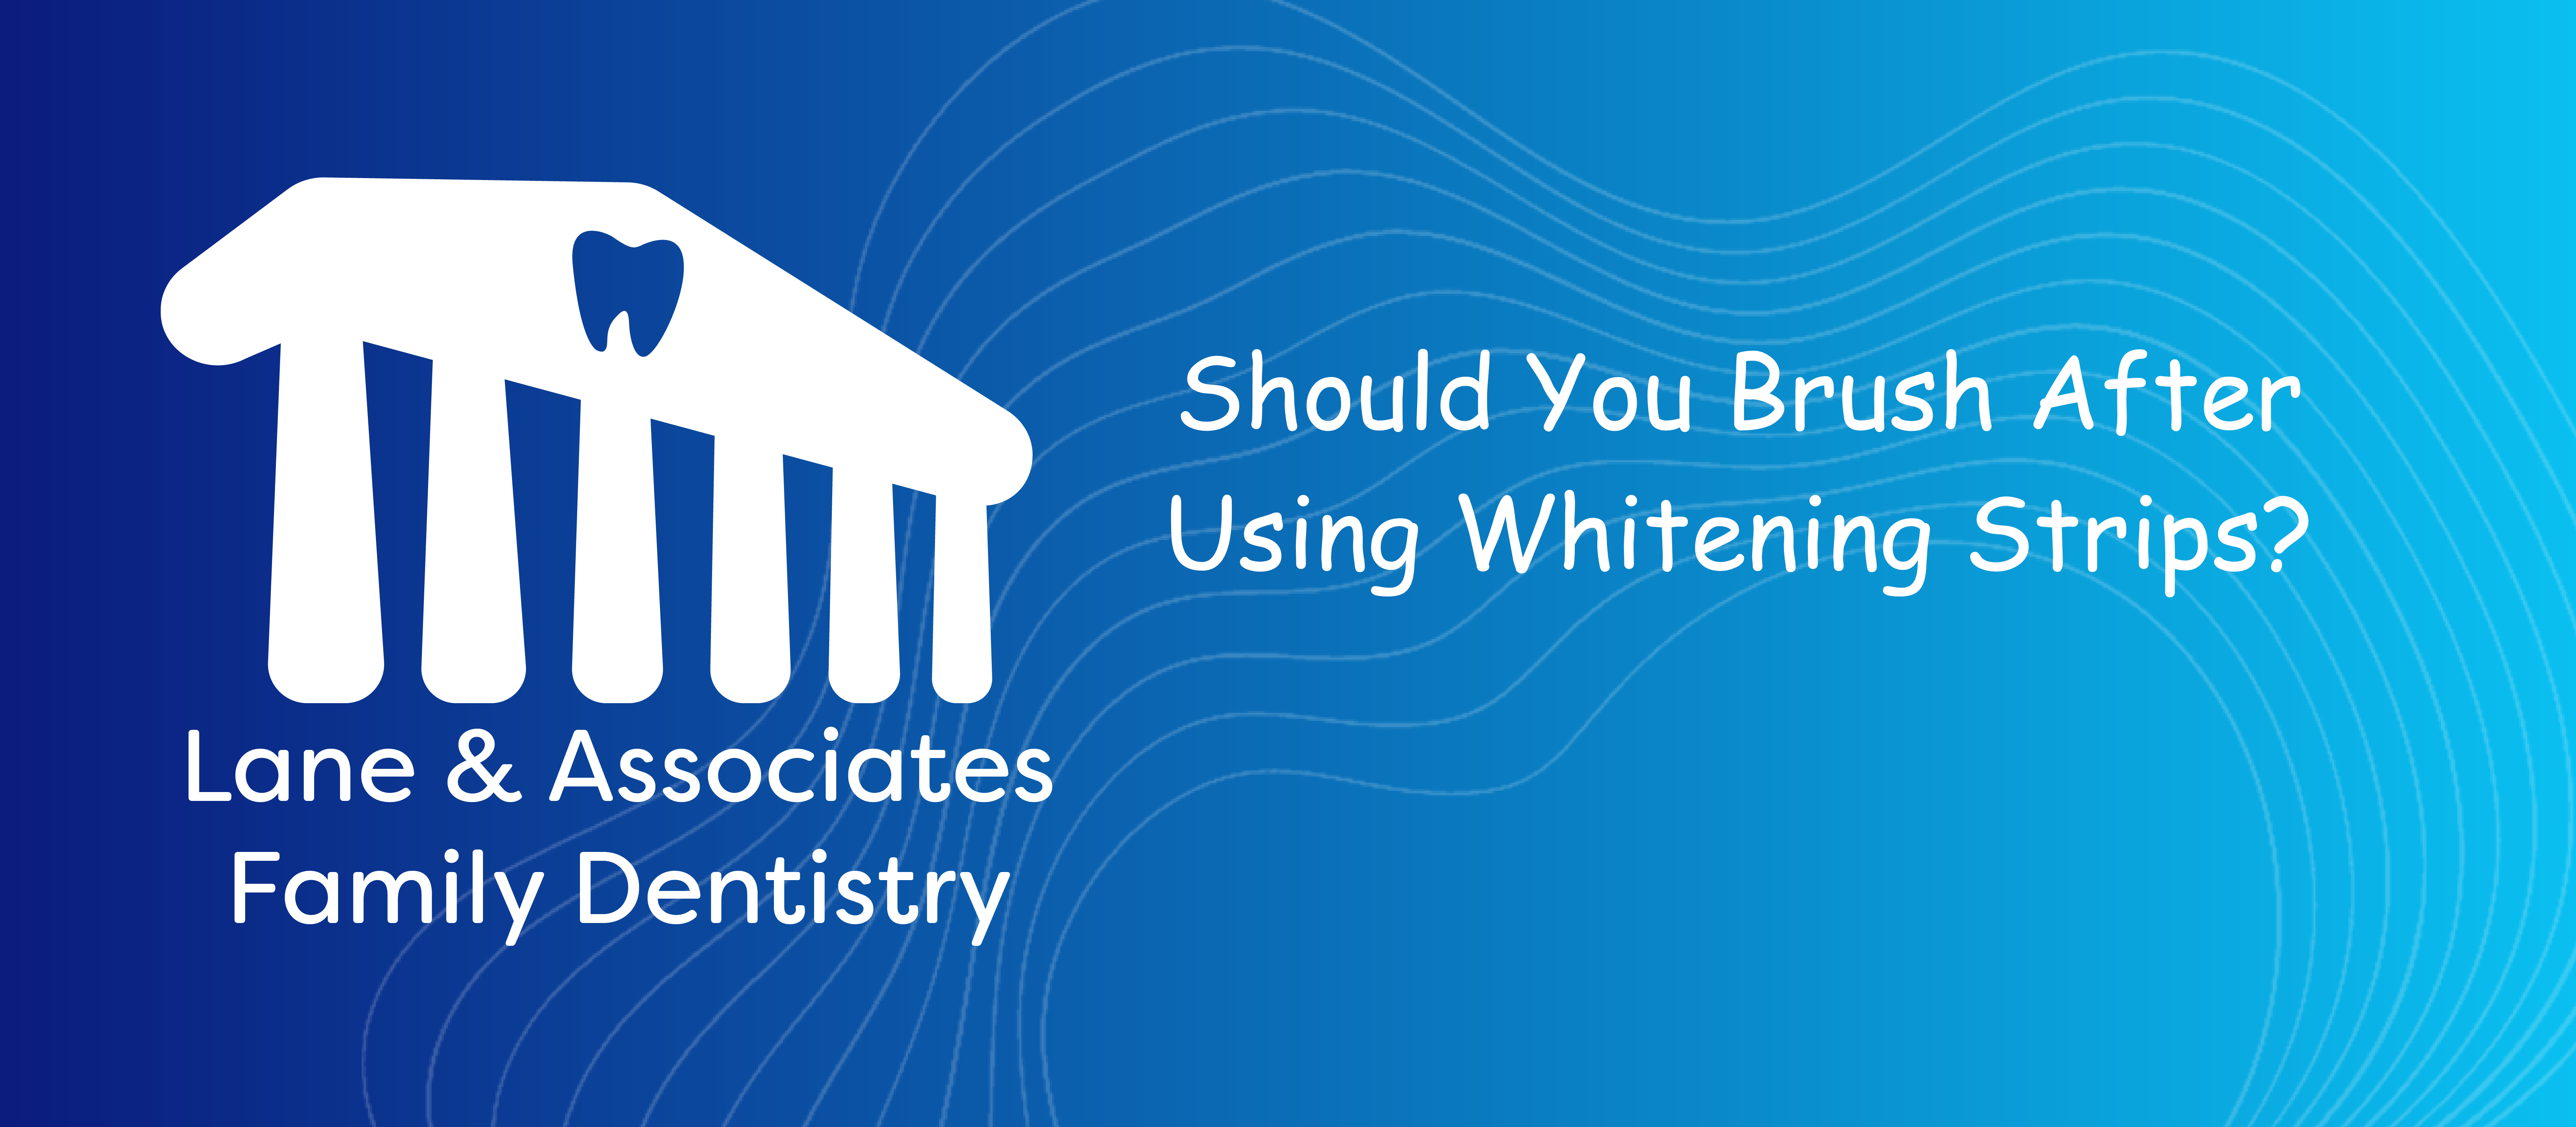 Should You Brush After Using Whitening Strips?